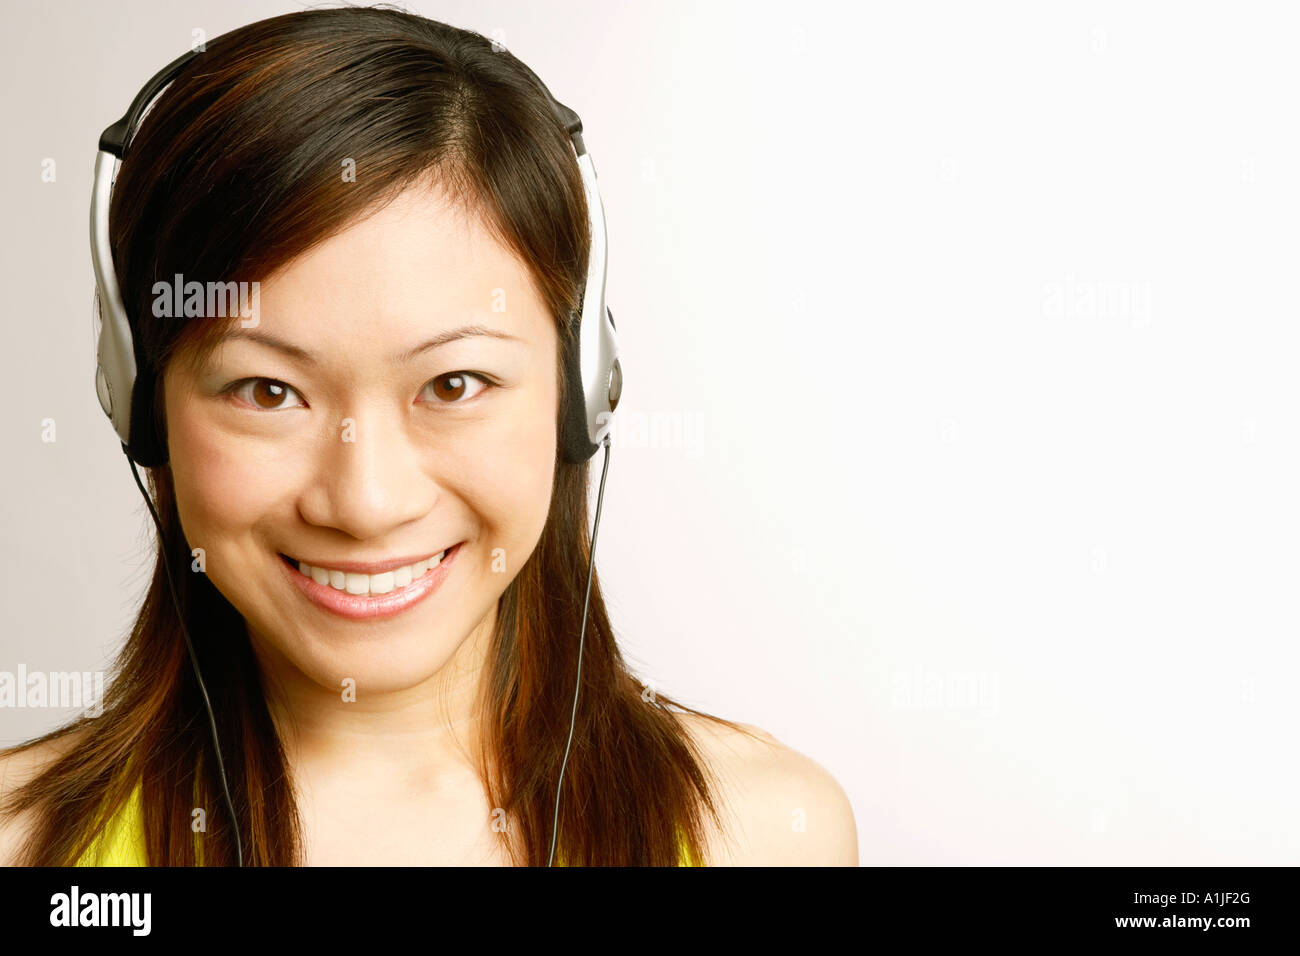 Portrait of a young woman listening to music and smiling Stock Photo